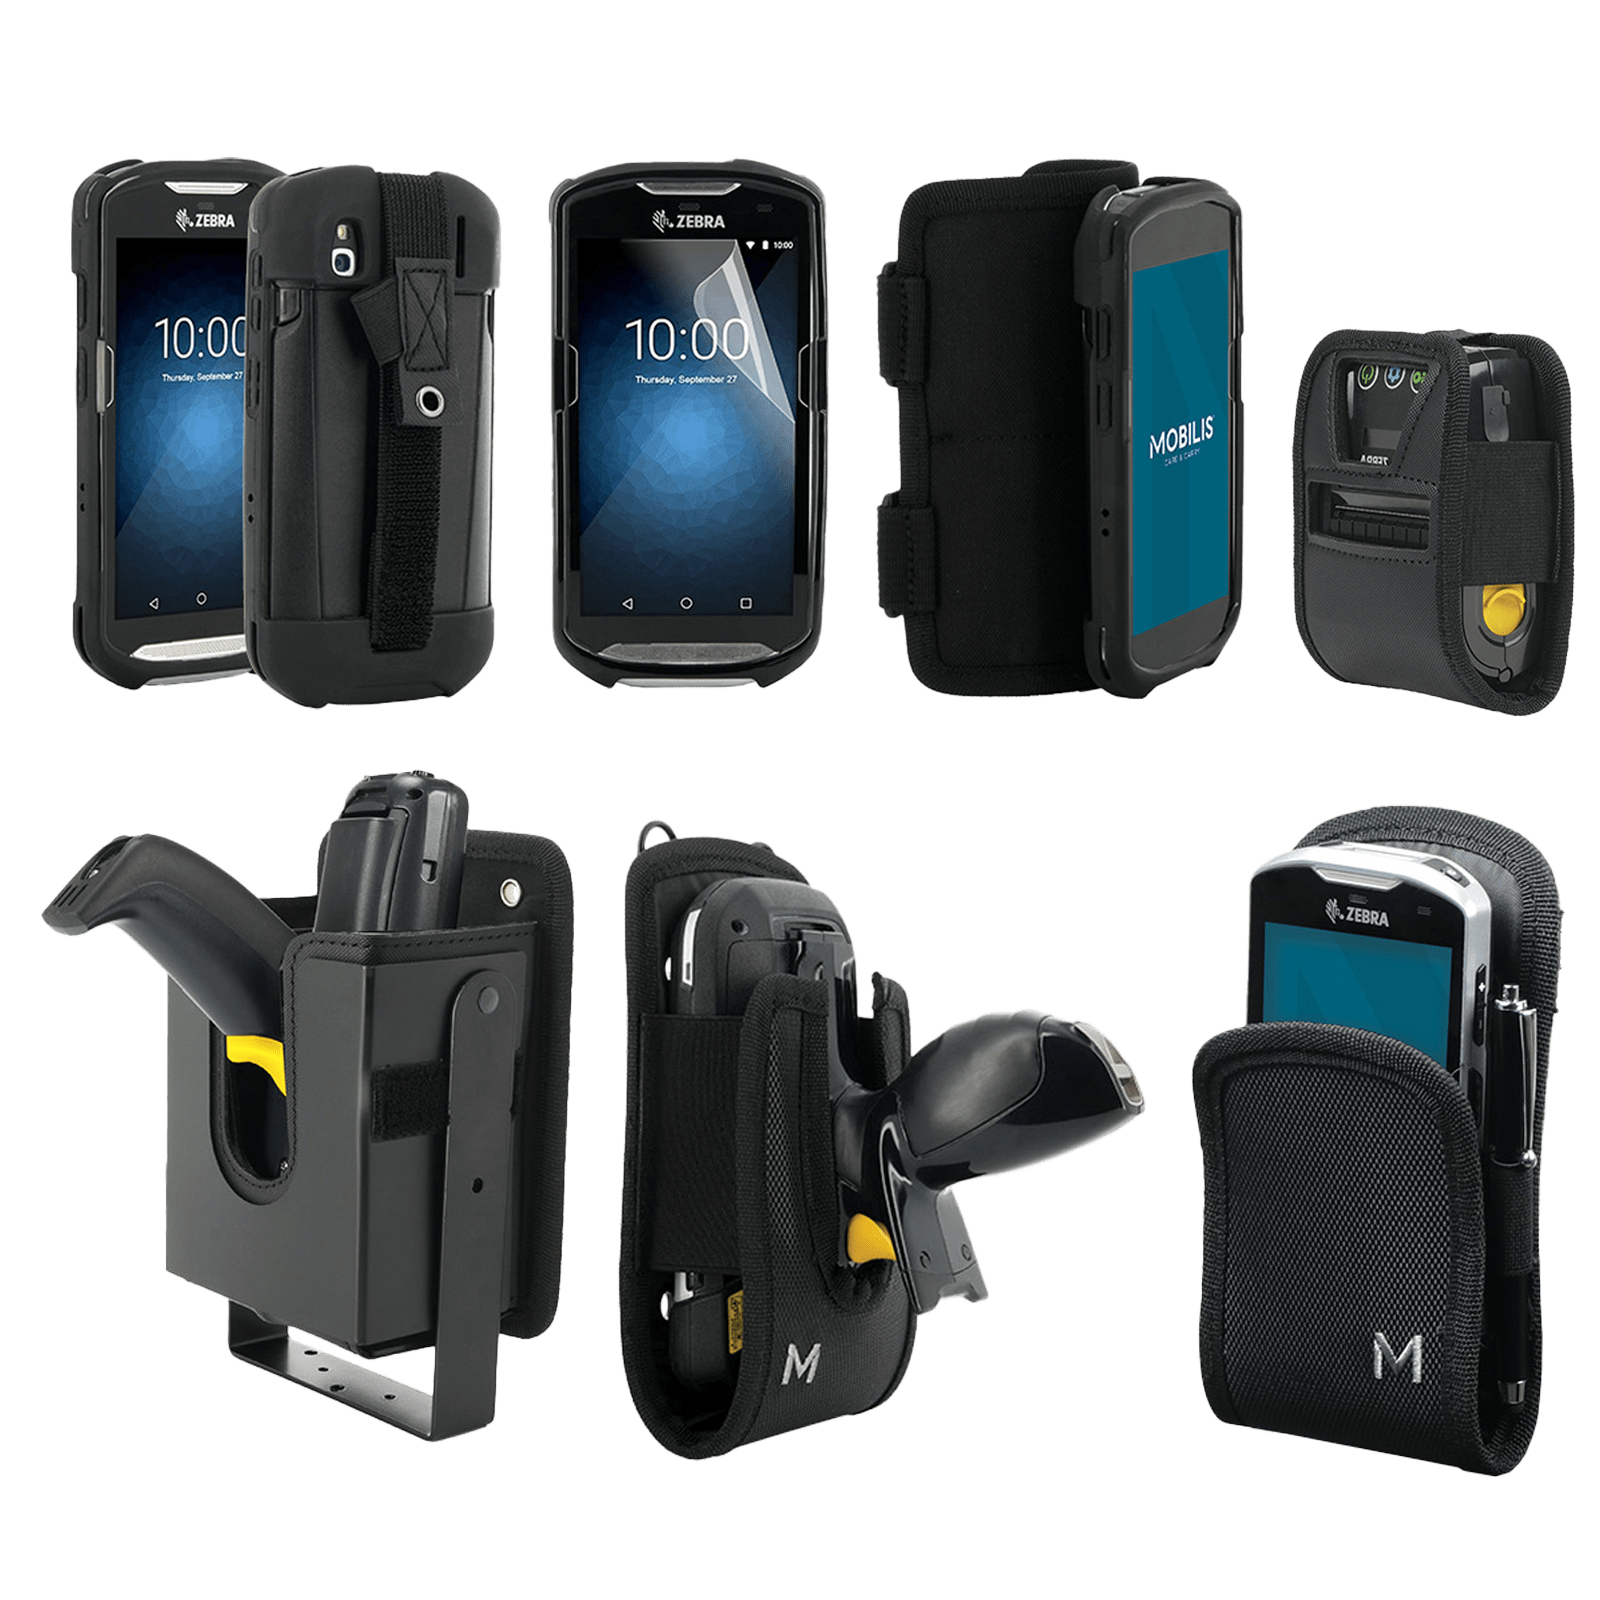 Mobilis protection accessories